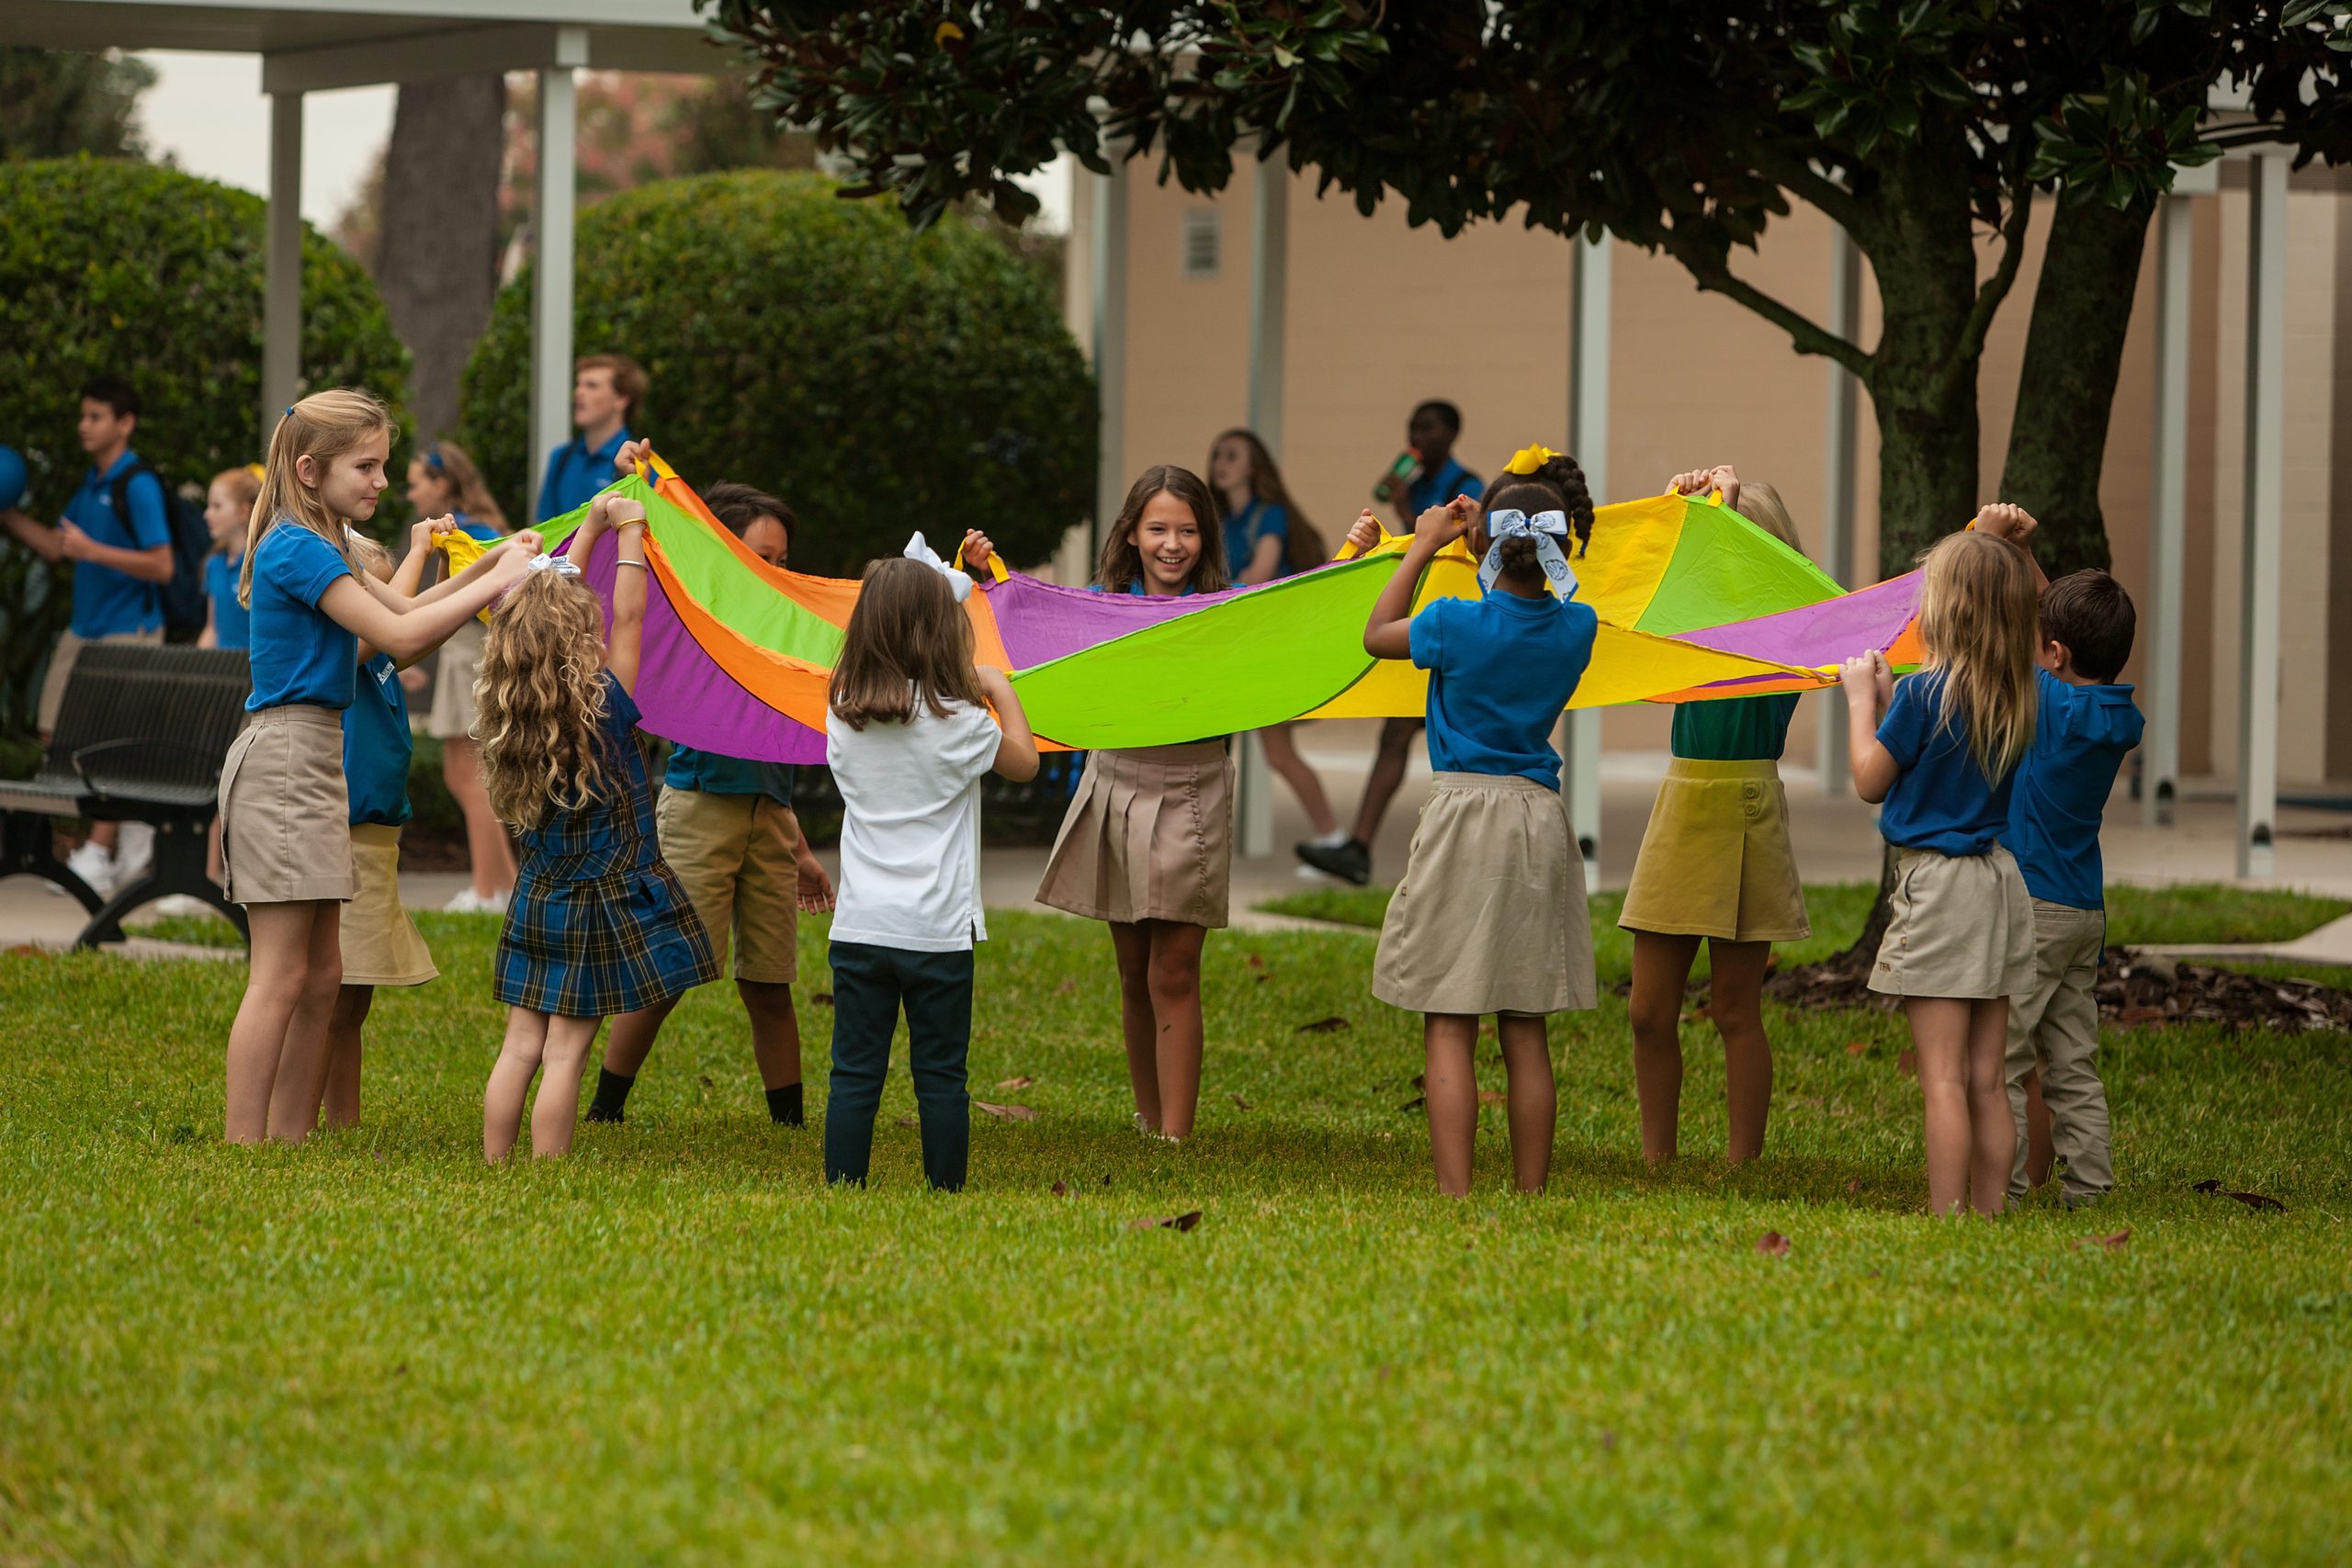 Several young children in a playground holding up a multi-colored parachute